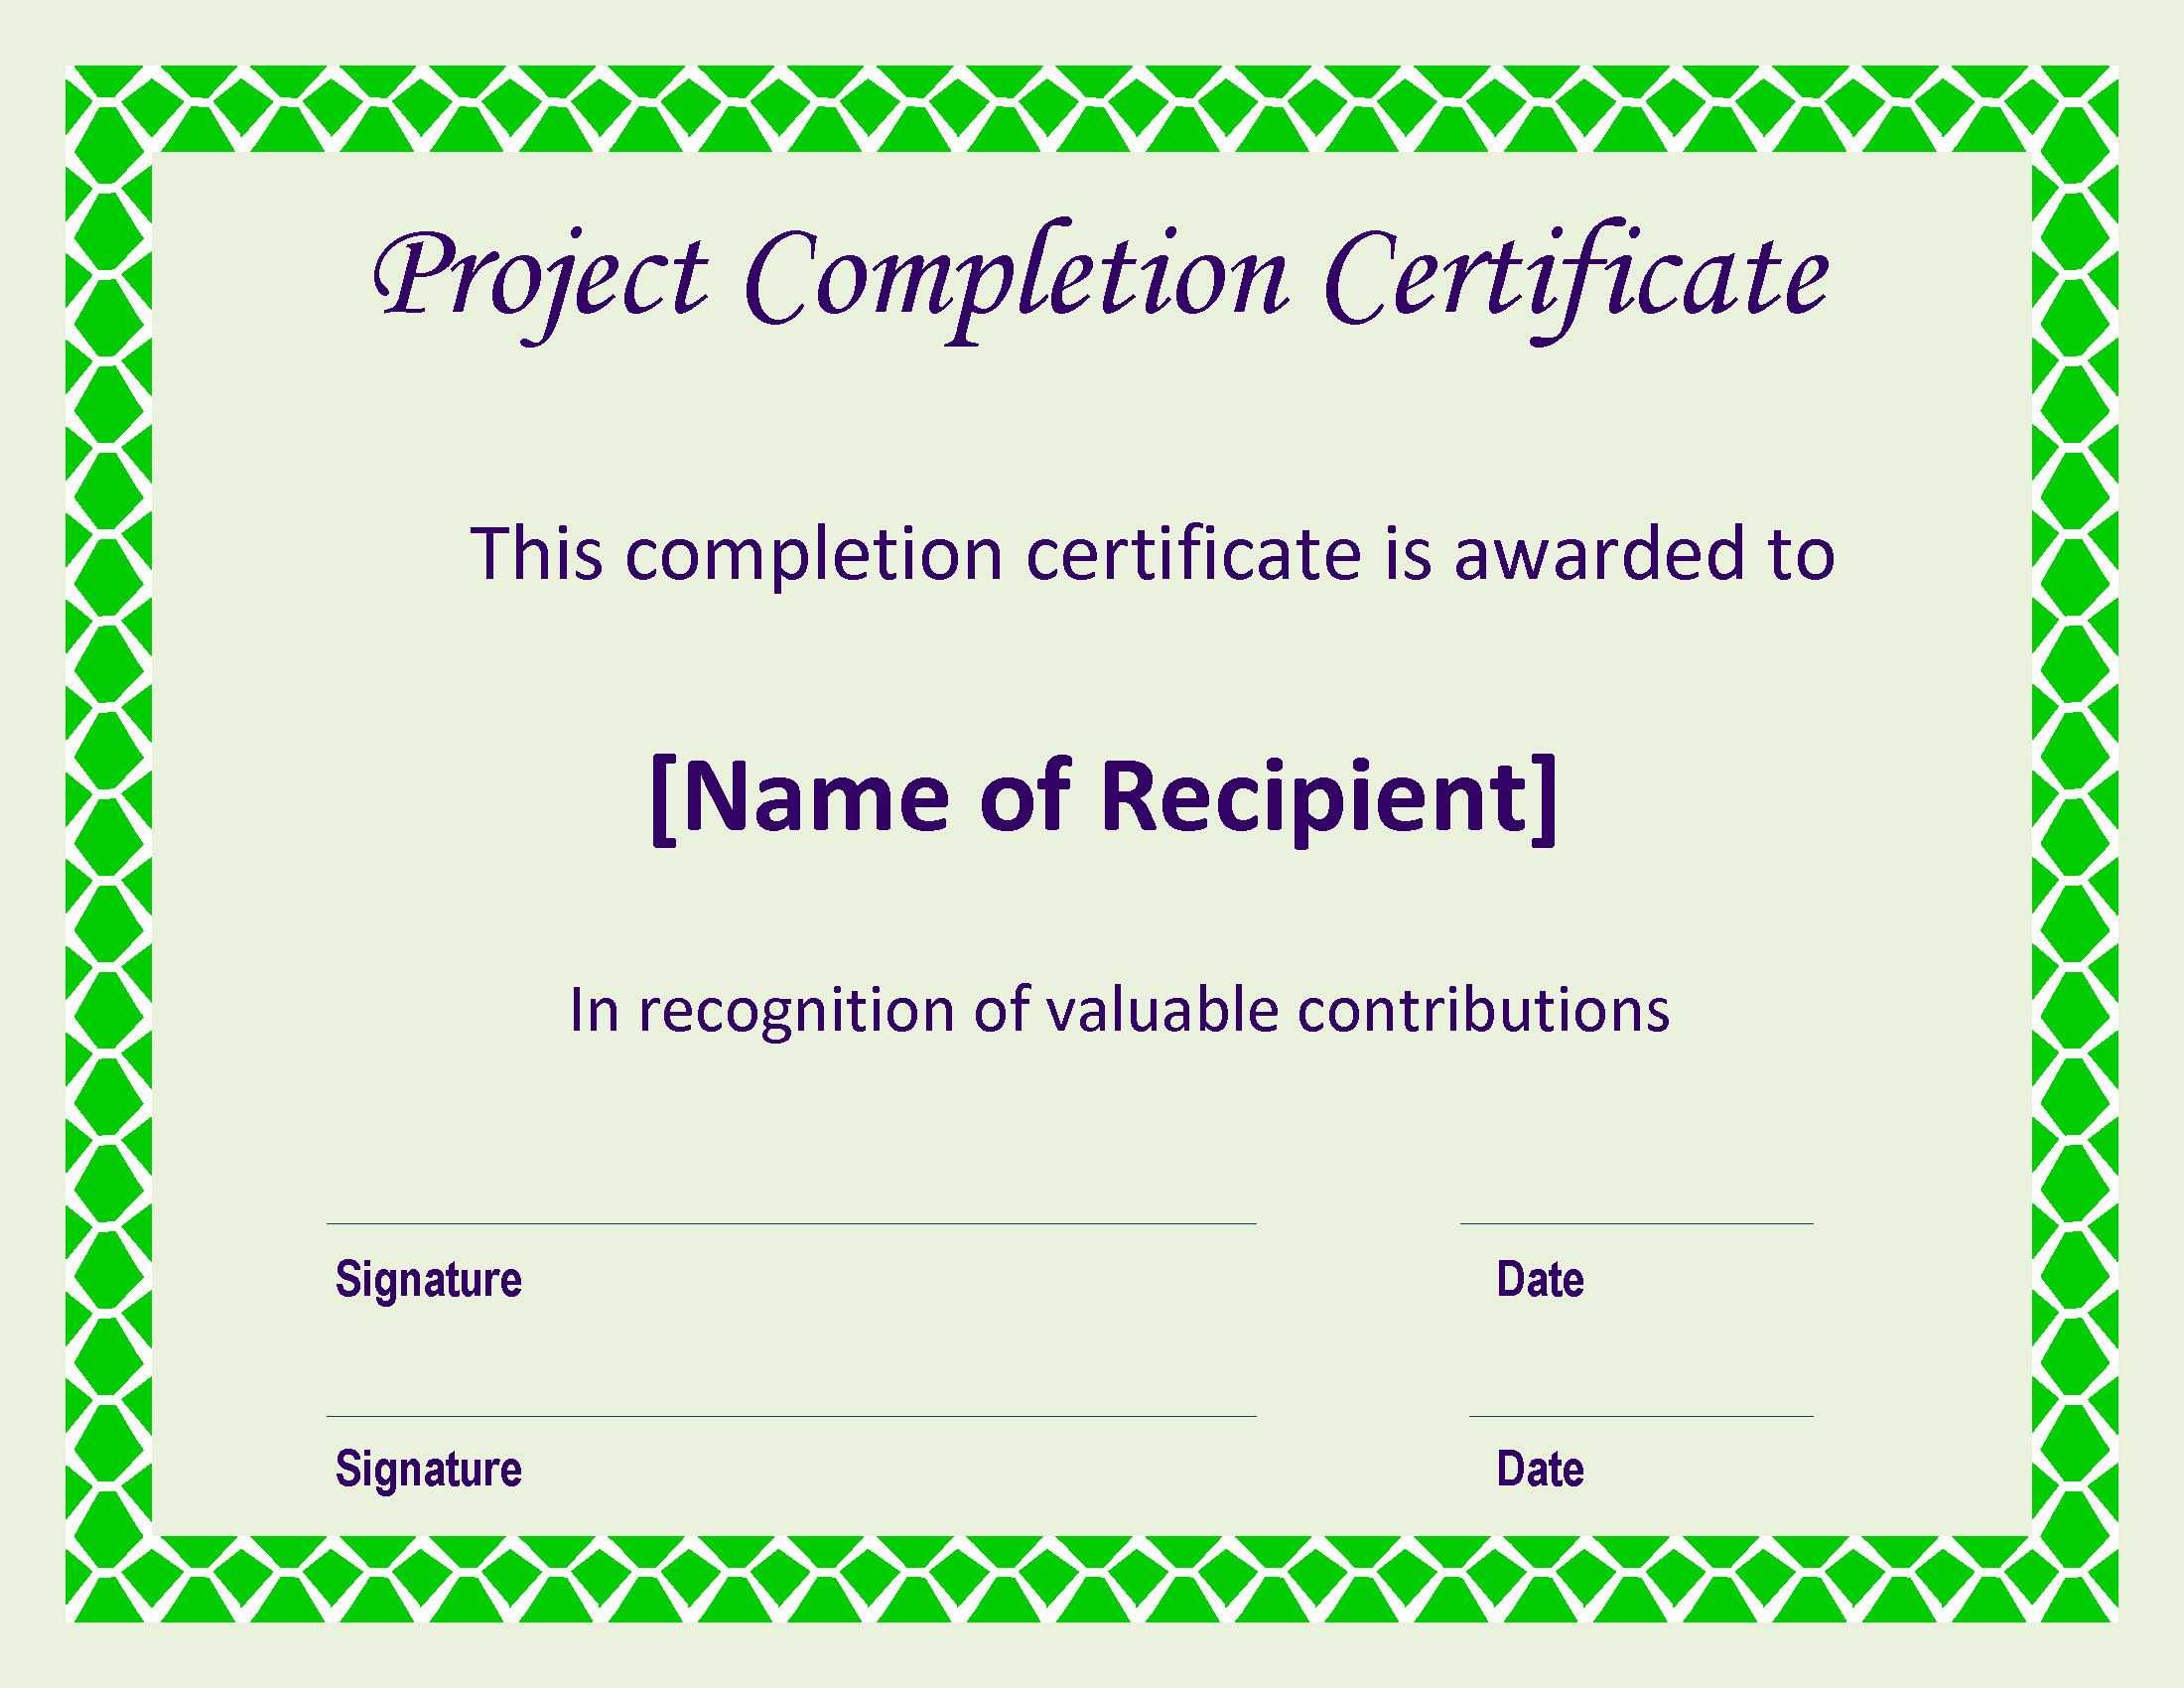 Certificate Of Completion Project | Templates At Pertaining To Certificate Template For Project Completion